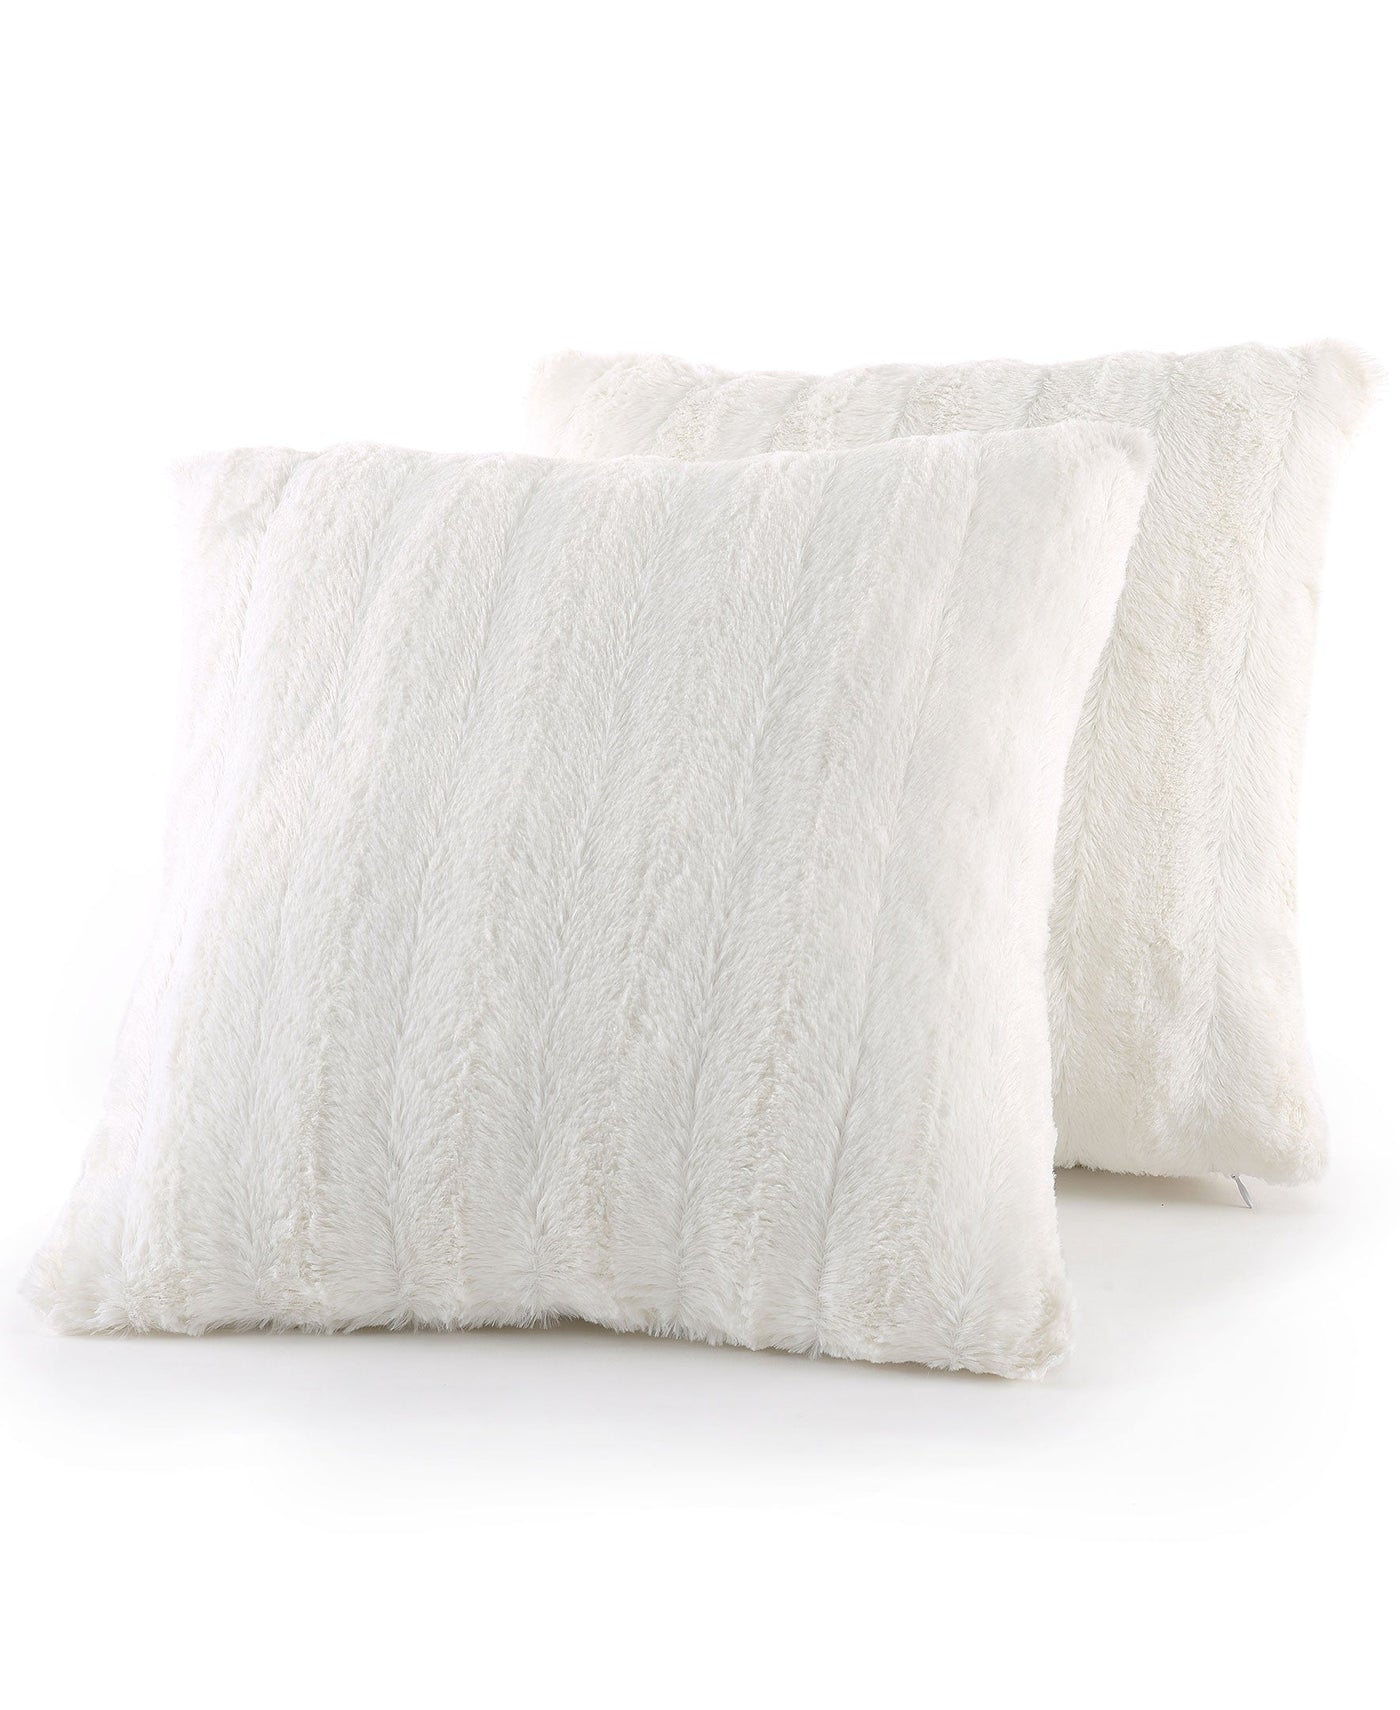 Cheer Collection Faux Fur Pillows - Decorative Throw Pillows for Couch &  Bed - Machine Washable - 18 x 18 - Sand (Set of 2)